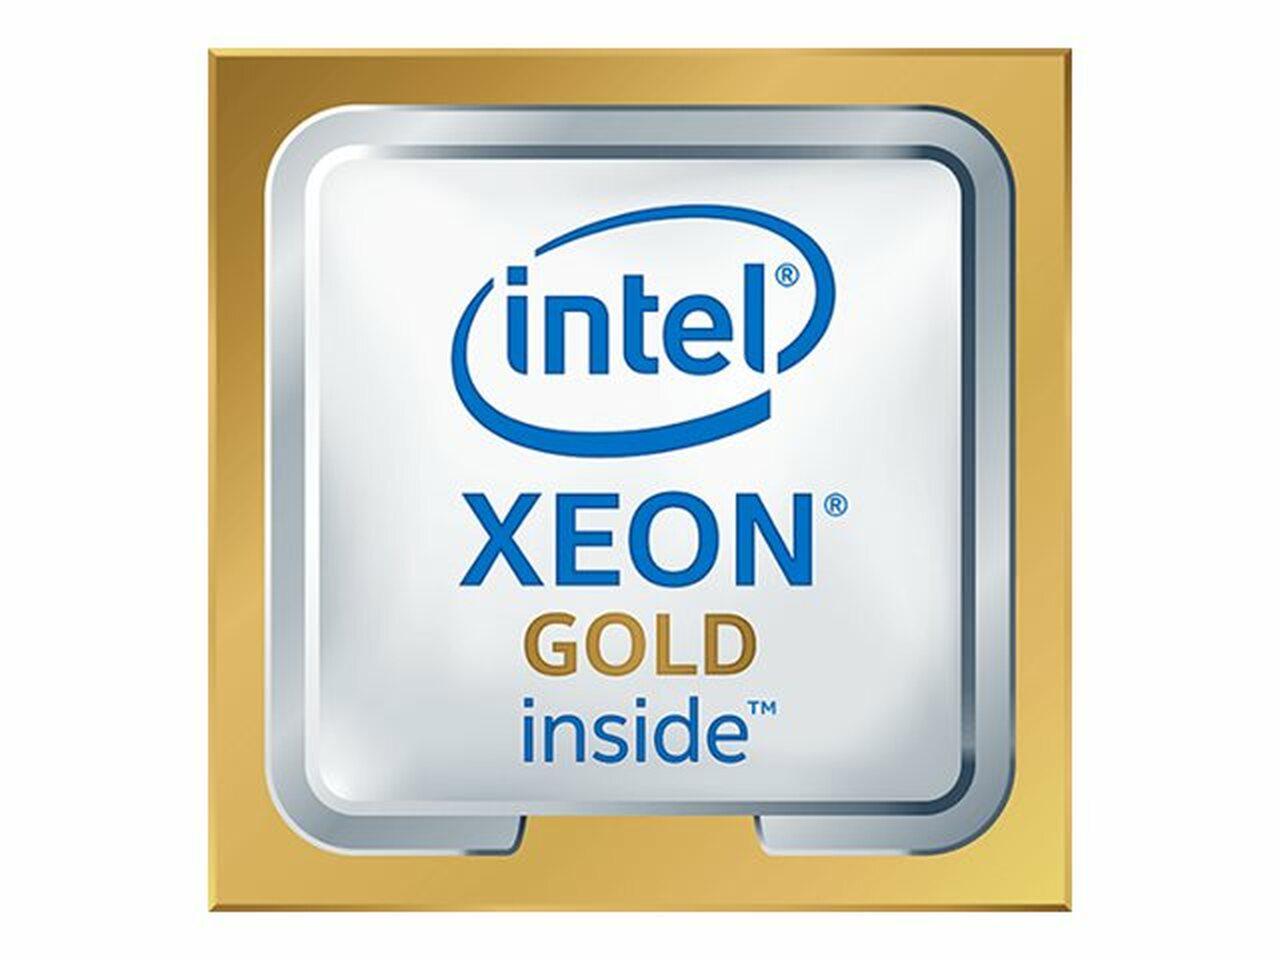 Intel CPU CD8068904572501 Xeon GOLD 6338 ICLK TRAY 32Cores/64Threads 2.0Ghz 48MB Bare